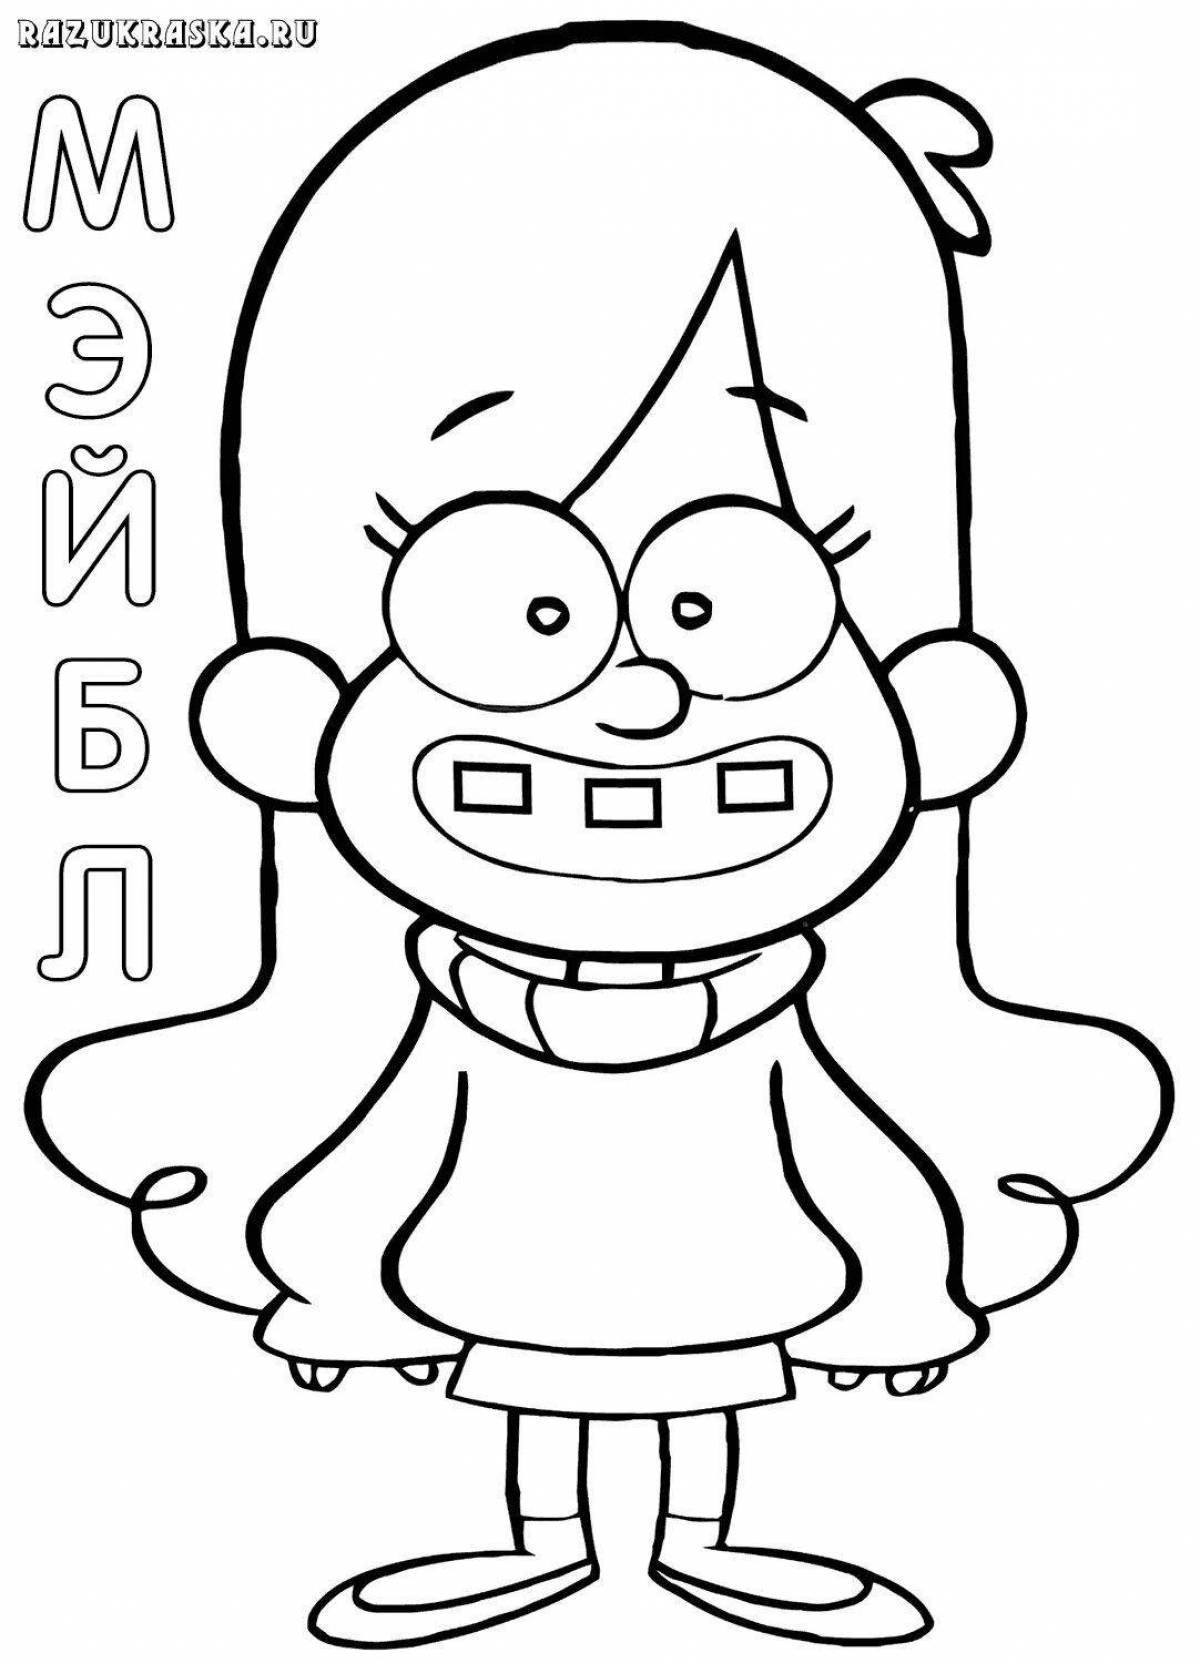 Colorful mabel coloring page